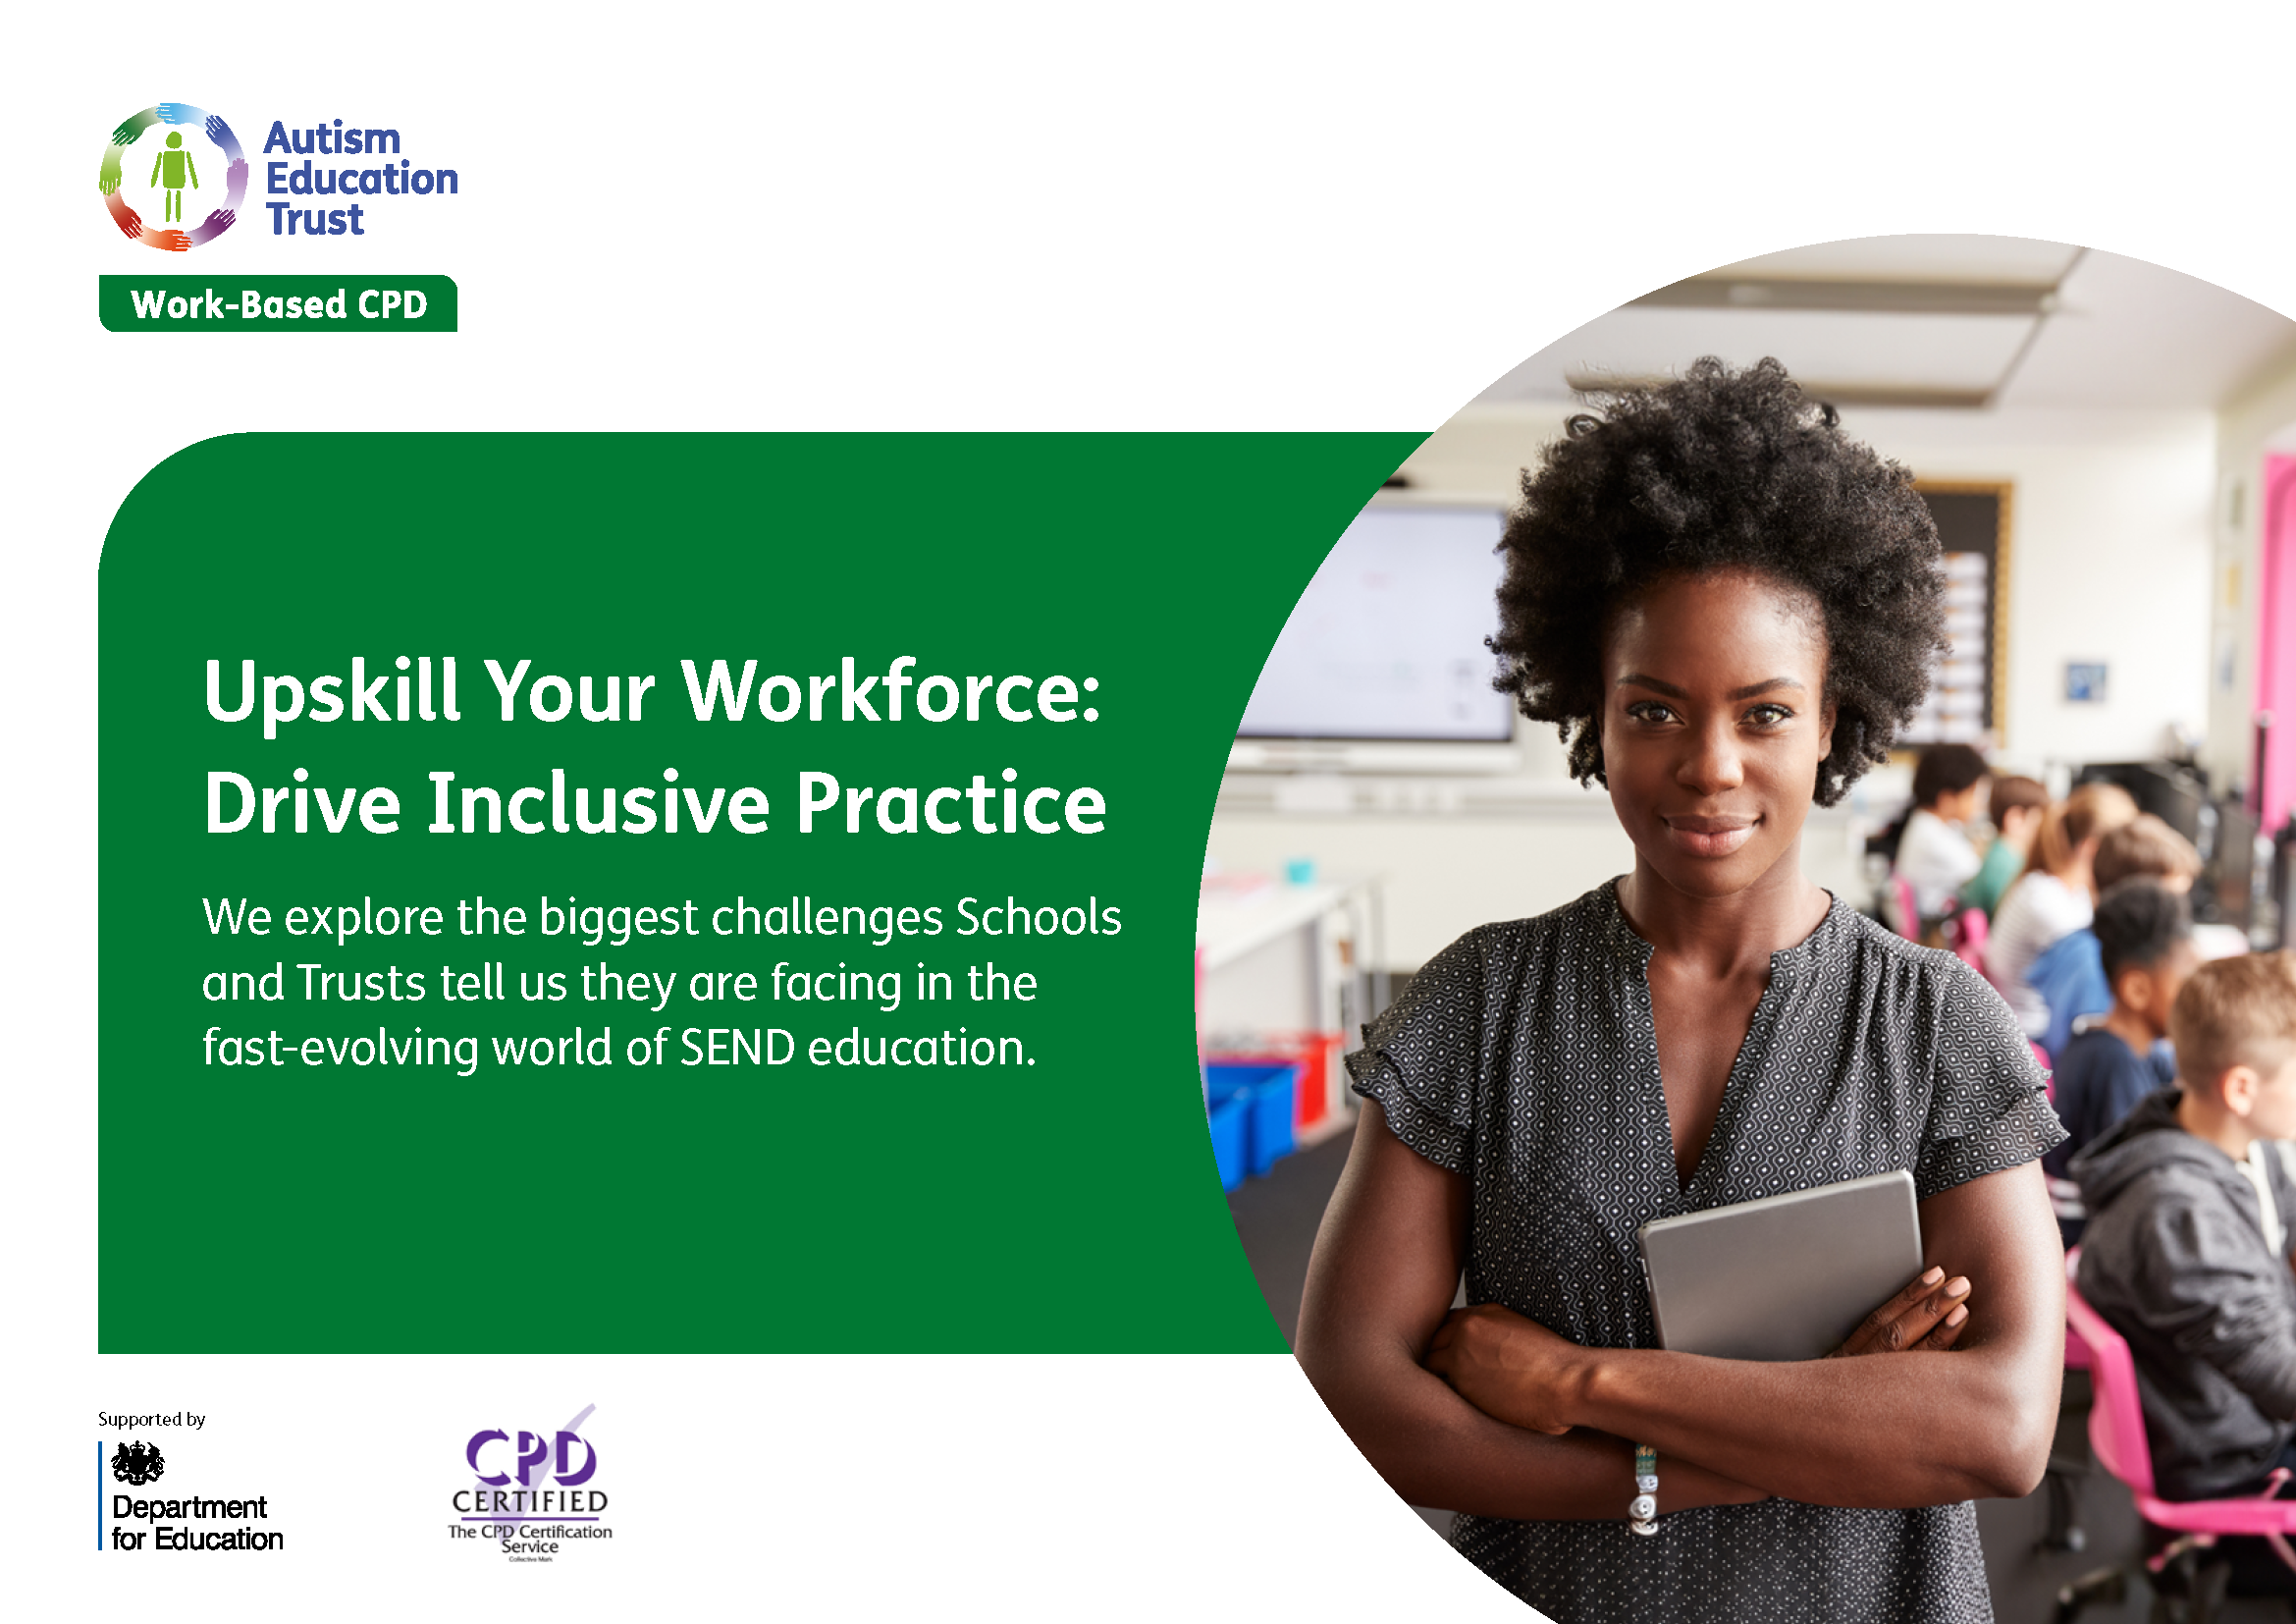 PDF Cover reads: Upskill Your Workforce and Drive Inclusive Practice: We explore the biggest challenges Schools and Trusts tell us they are facing in the fast-evolving world of SEND education.